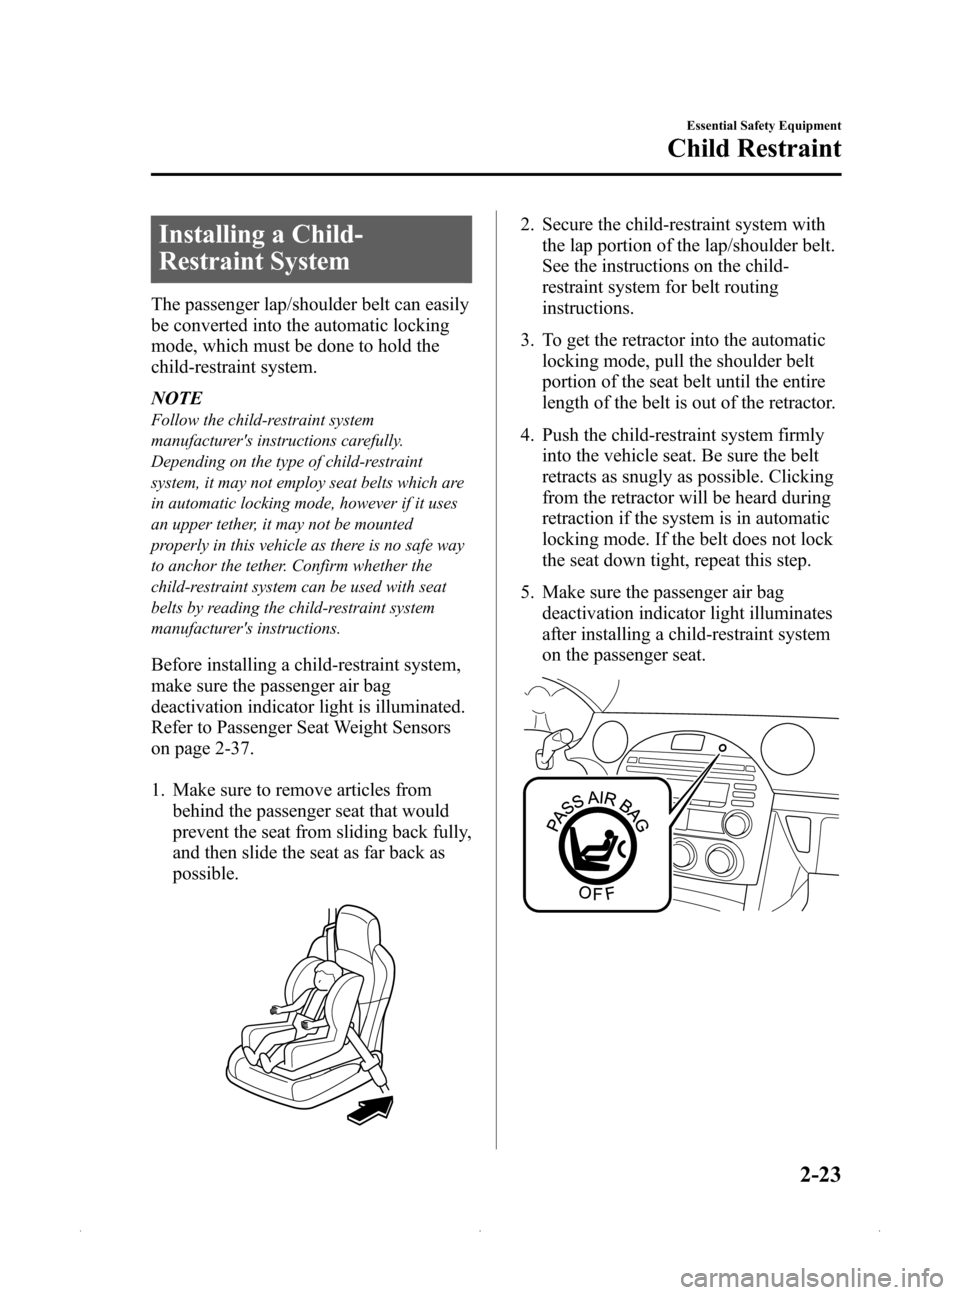 MAZDA MODEL MX-5 PRHT 2015  Owners Manual (in English) Black plate (35,1)
Installing a Child-
Restraint System
The passenger lap/shoulder belt can easily
be converted into the automatic locking
mode, which must be done to hold the
child-restraint system.
